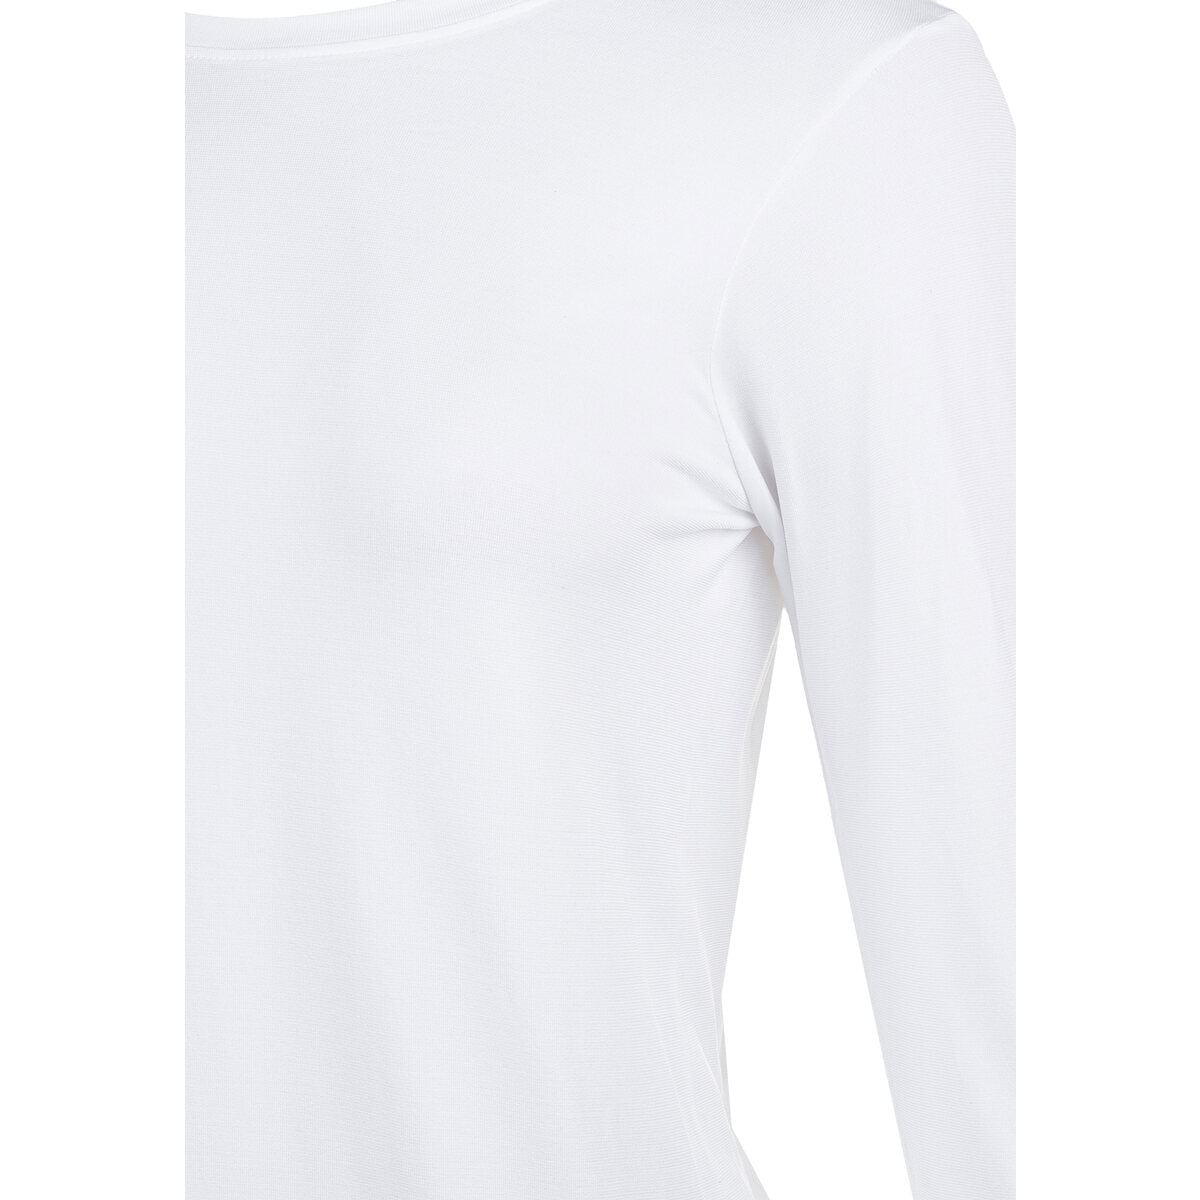 Athlecia Julee Womenswear Loose Fit Long Sleeve Seamless Tee - White 7 Shaws Department Stores